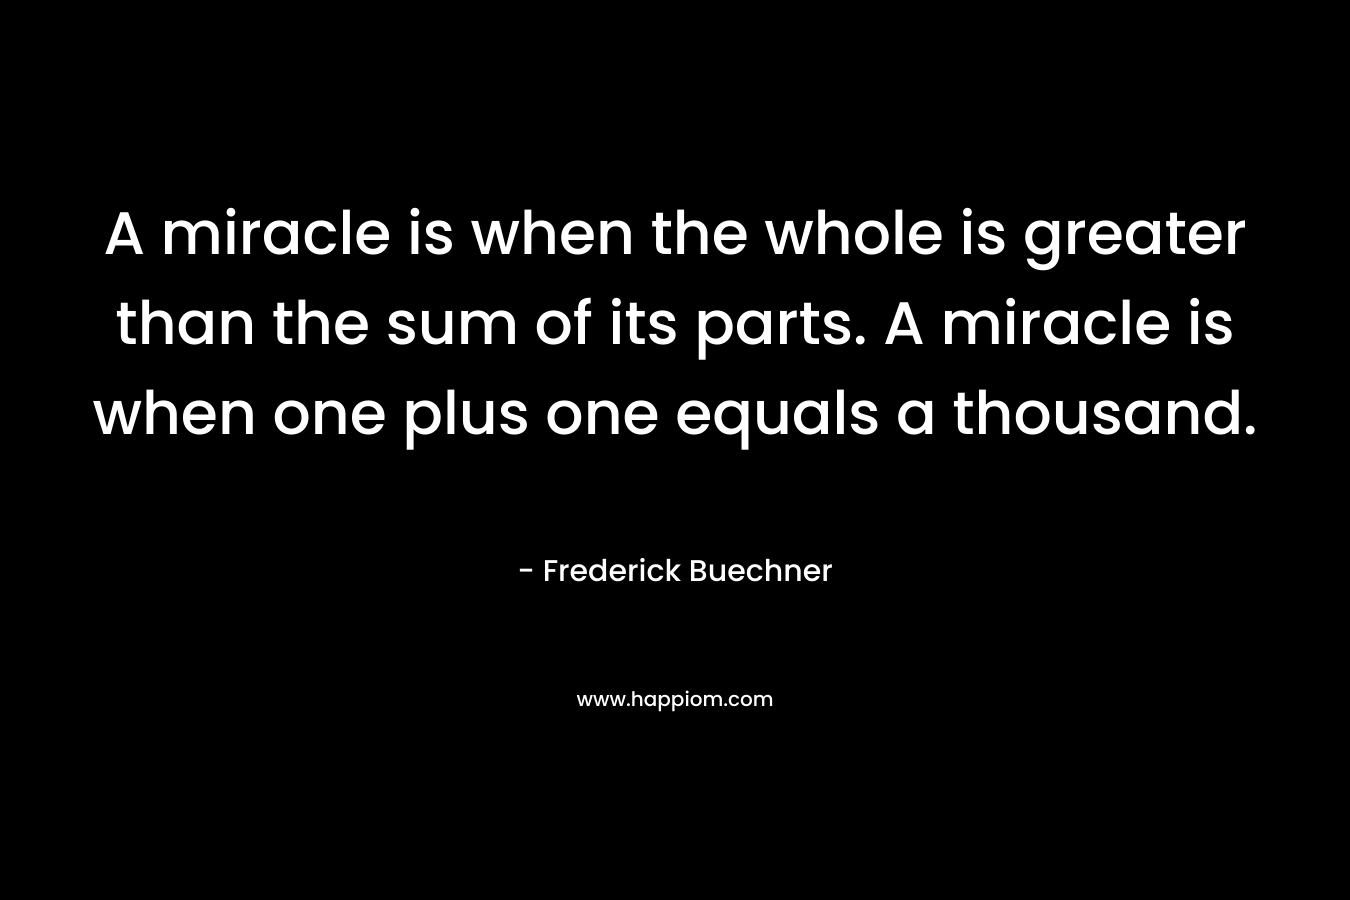 A miracle is when the whole is greater than the sum of its parts. A miracle is when one plus one equals a thousand.